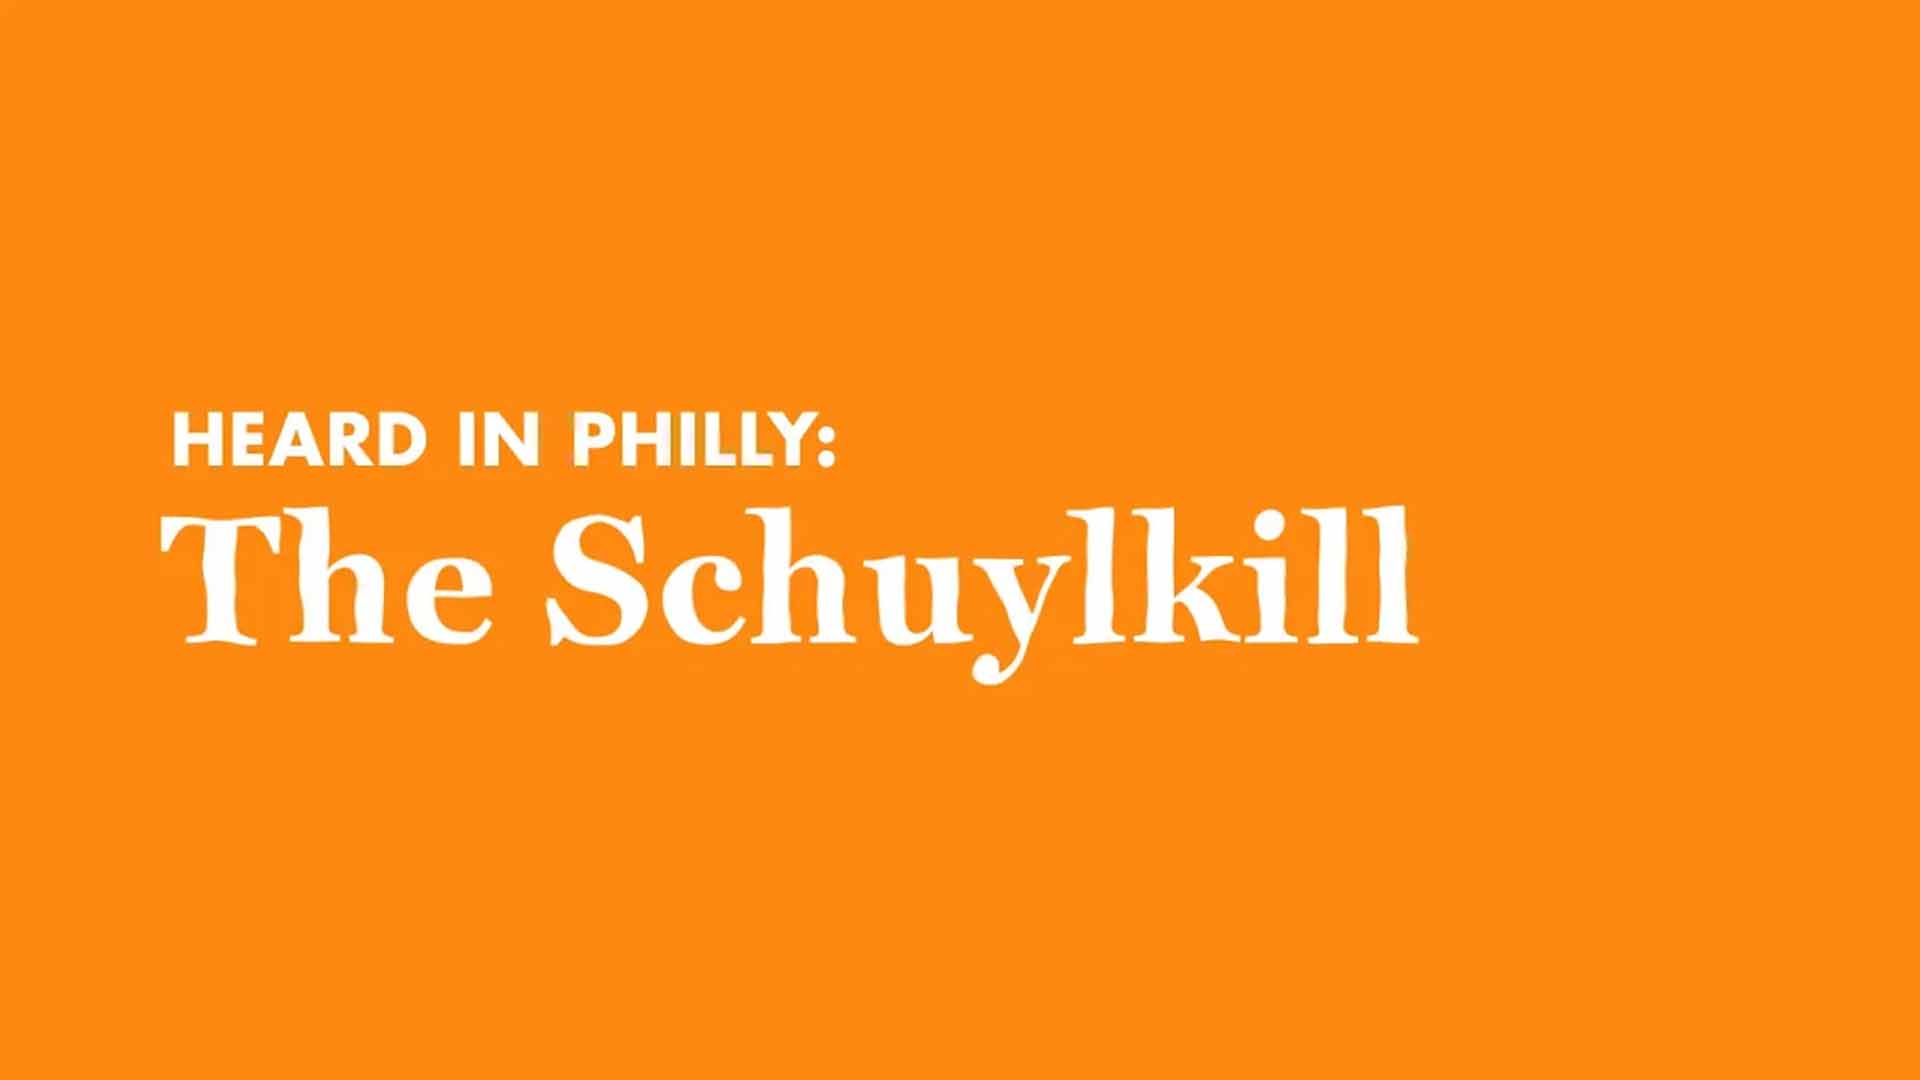 Heard in Philly: The Schuylkill